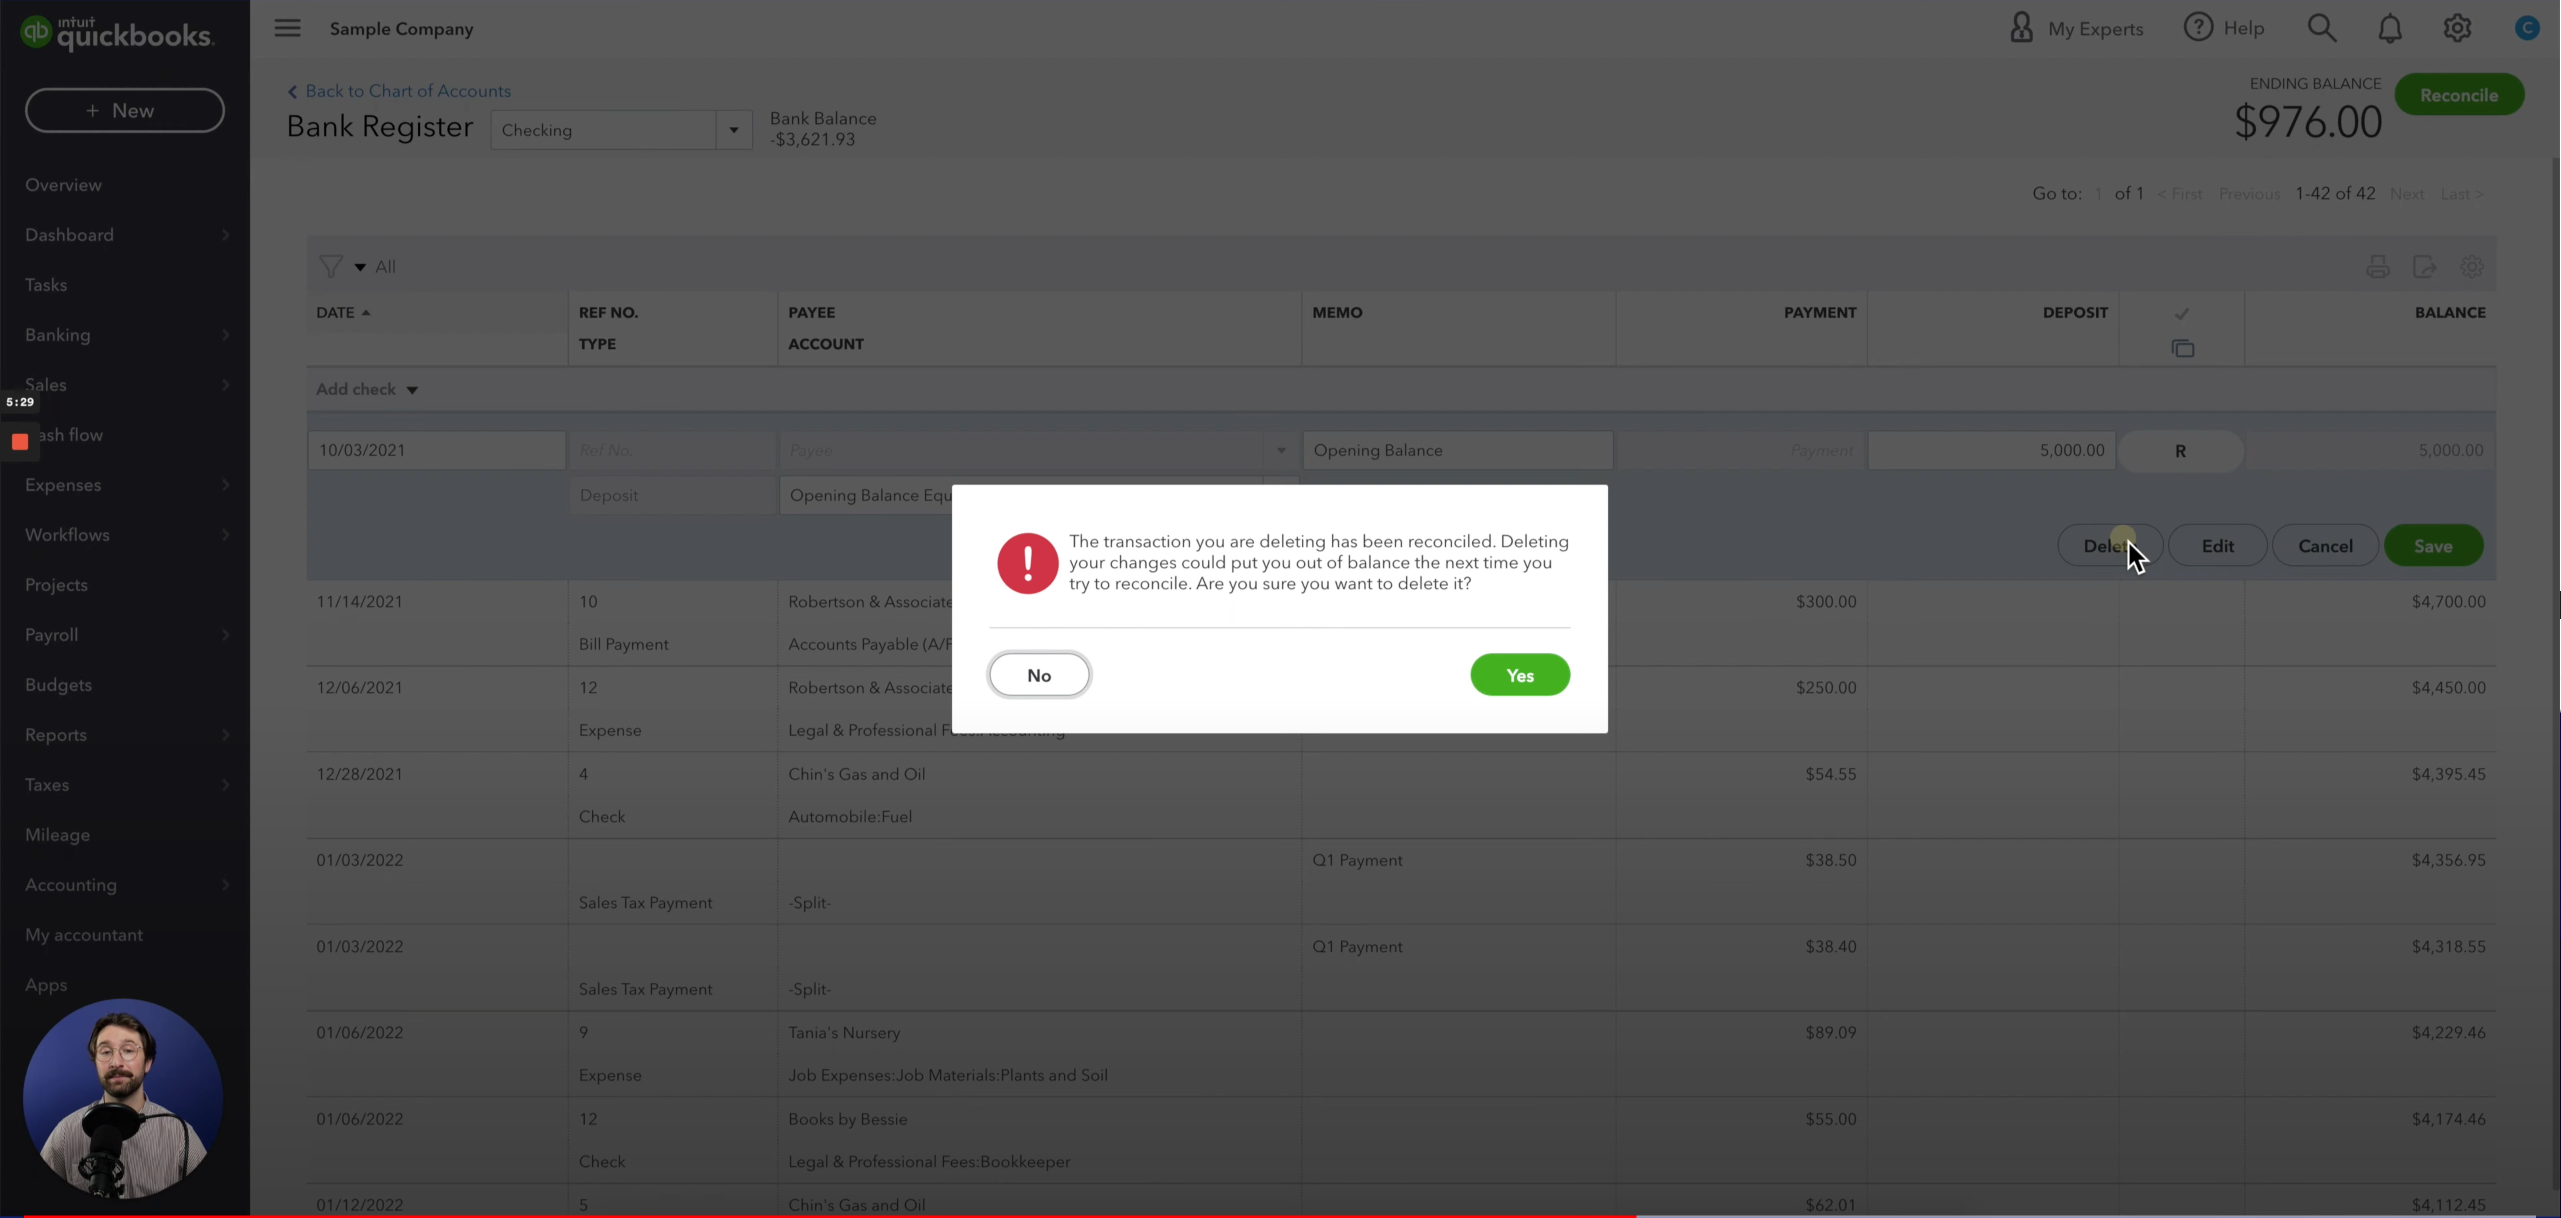 QuickBooks Online will need you to confirm the deletion of the deposit